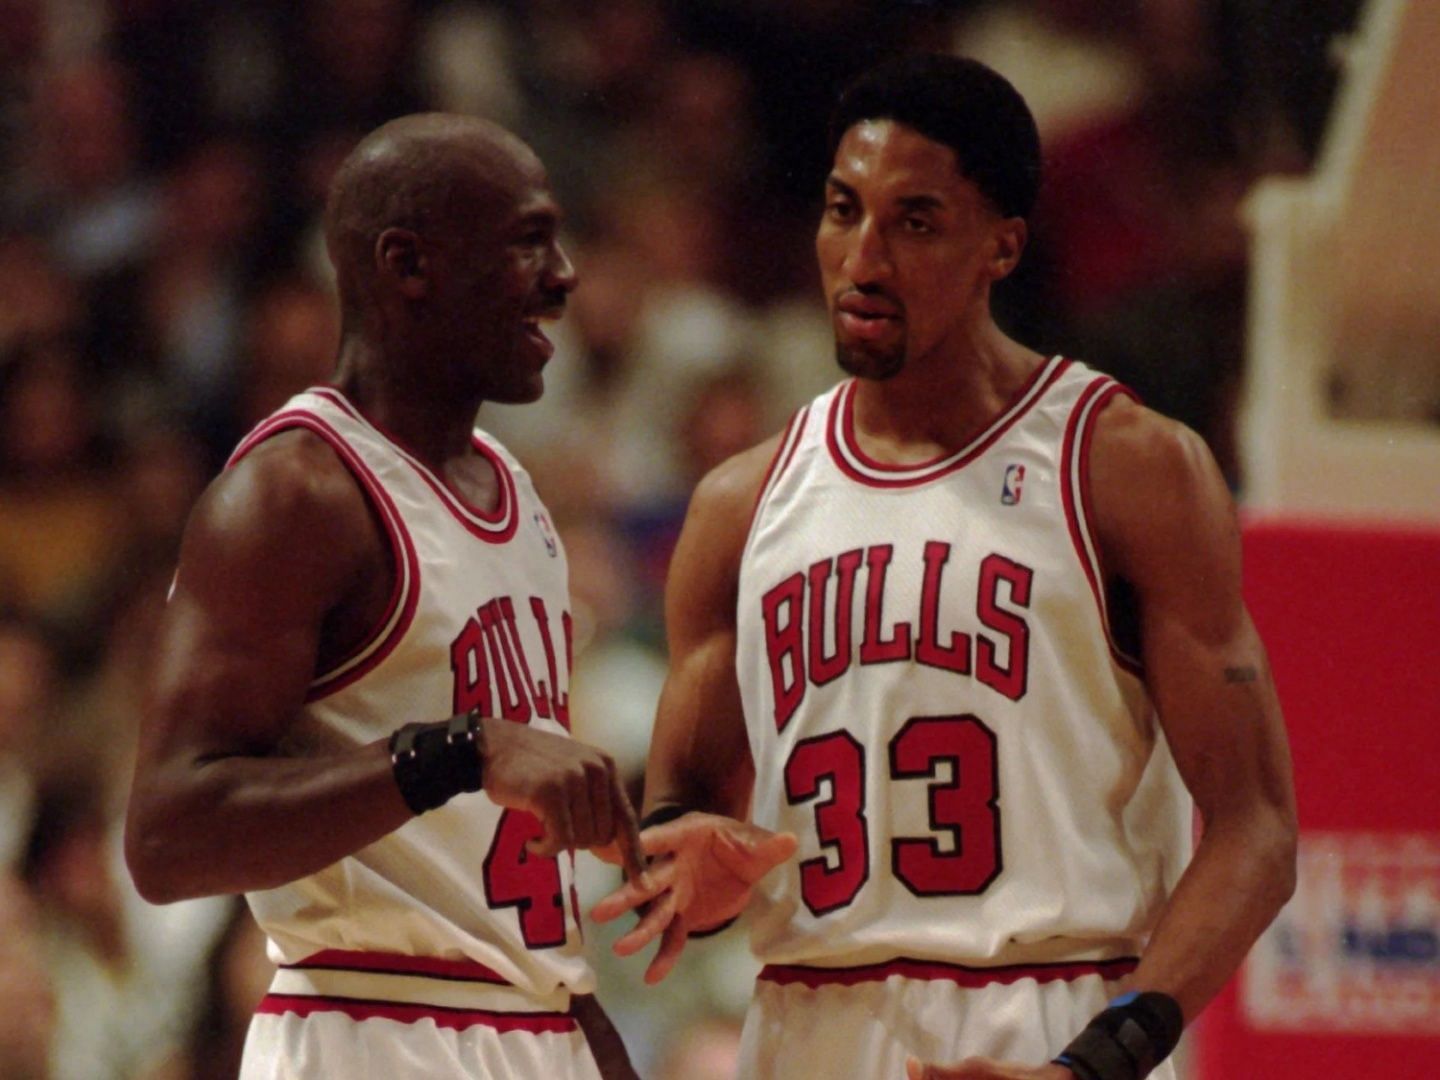 Michael Jordan and Scottie Pippen in the 1995 NBA playoffs.